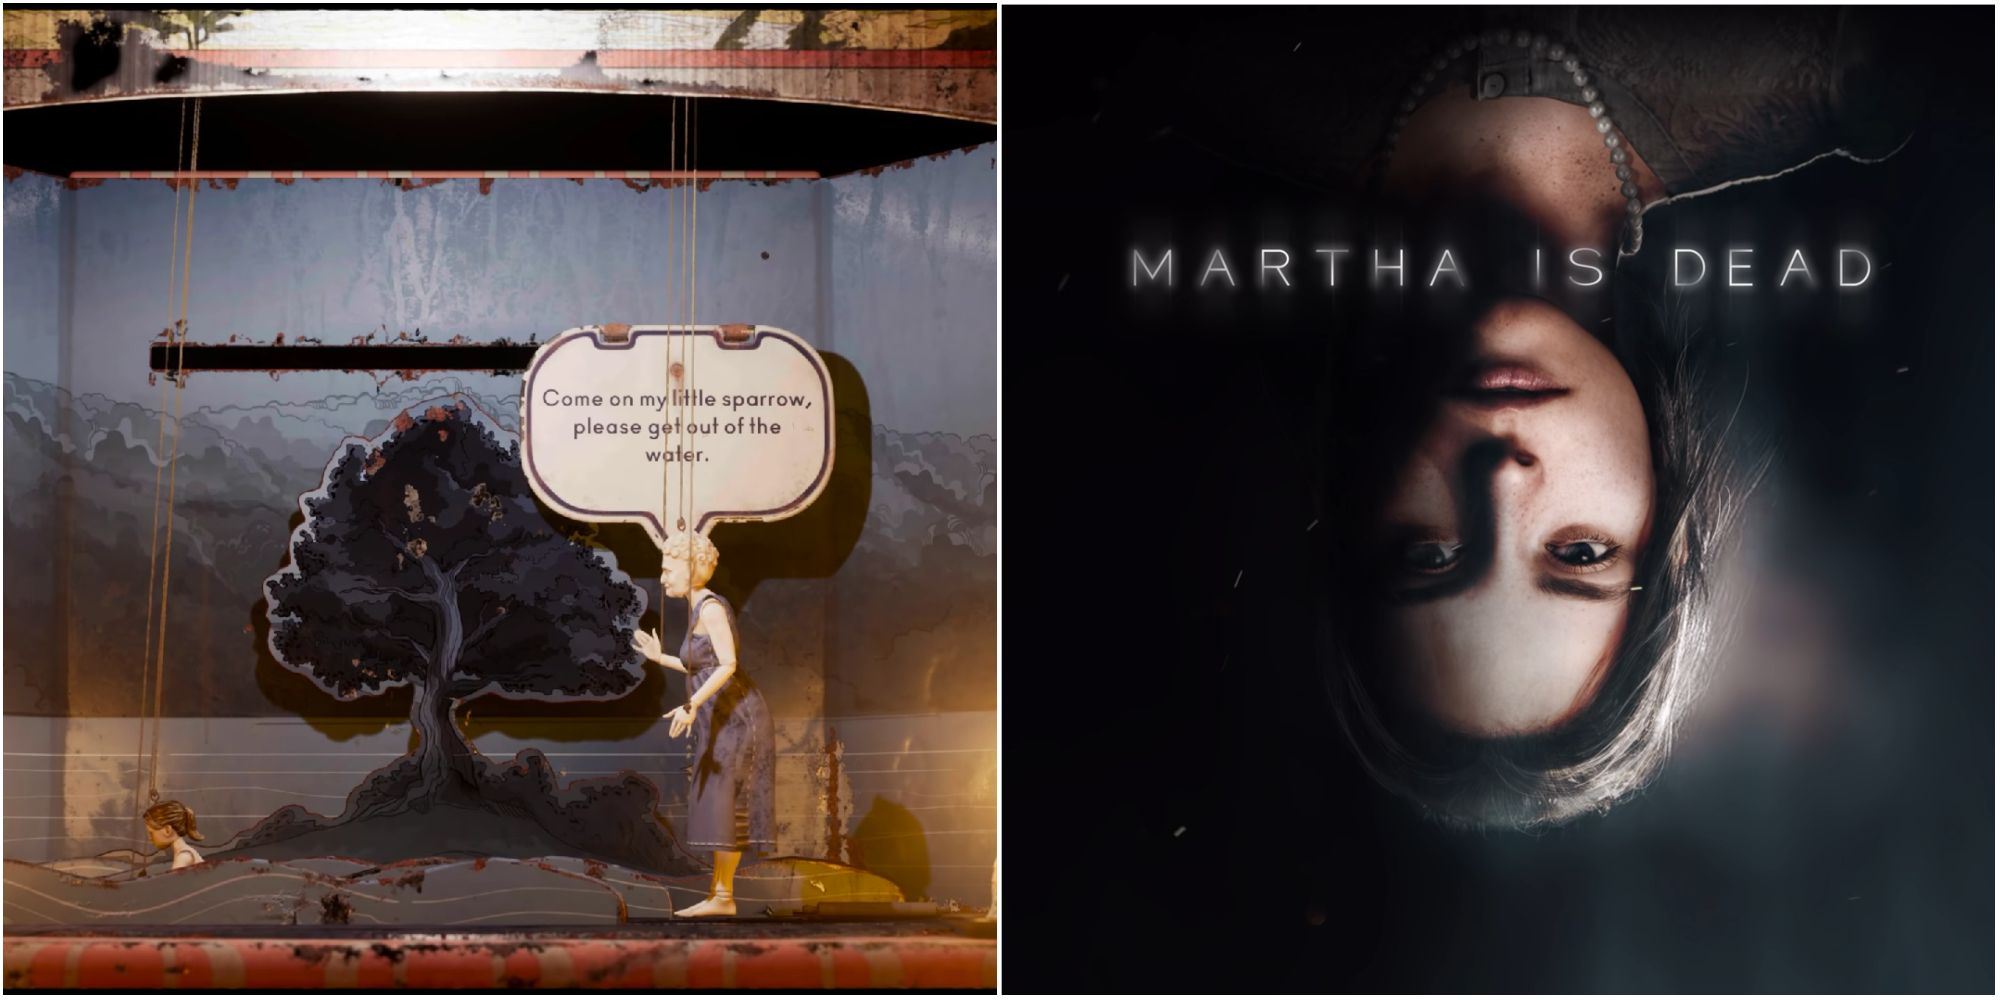 Martha Is Dead screenshots from the trailer - title image and narrative details.